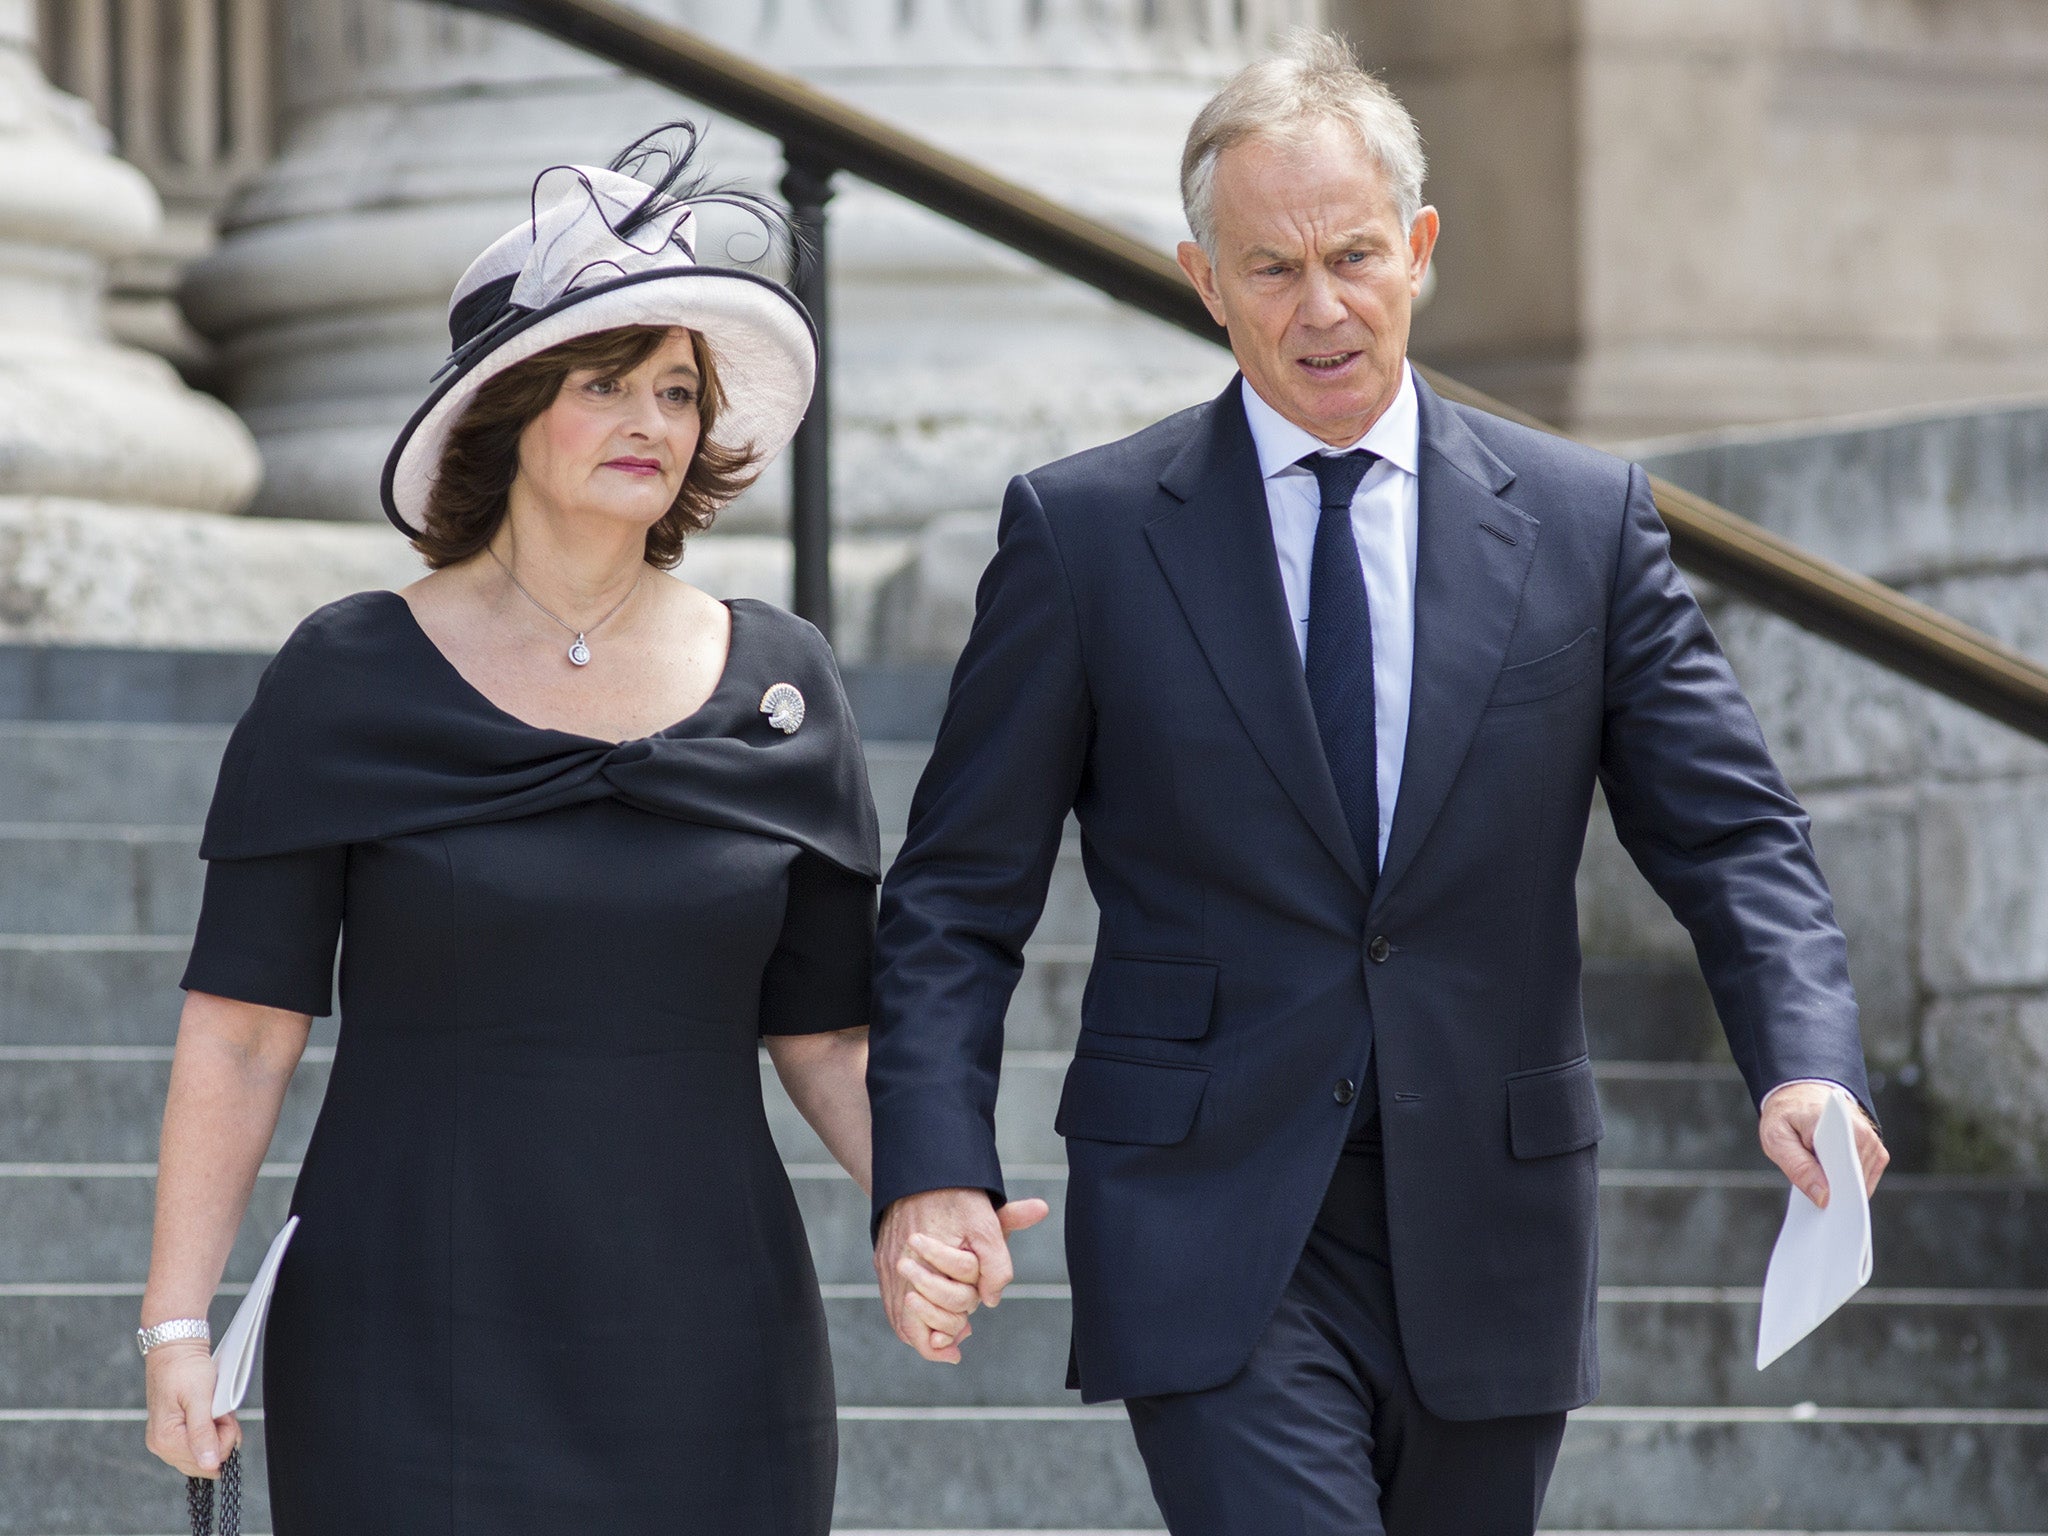 The Blair family have a property empire worth at least £27m